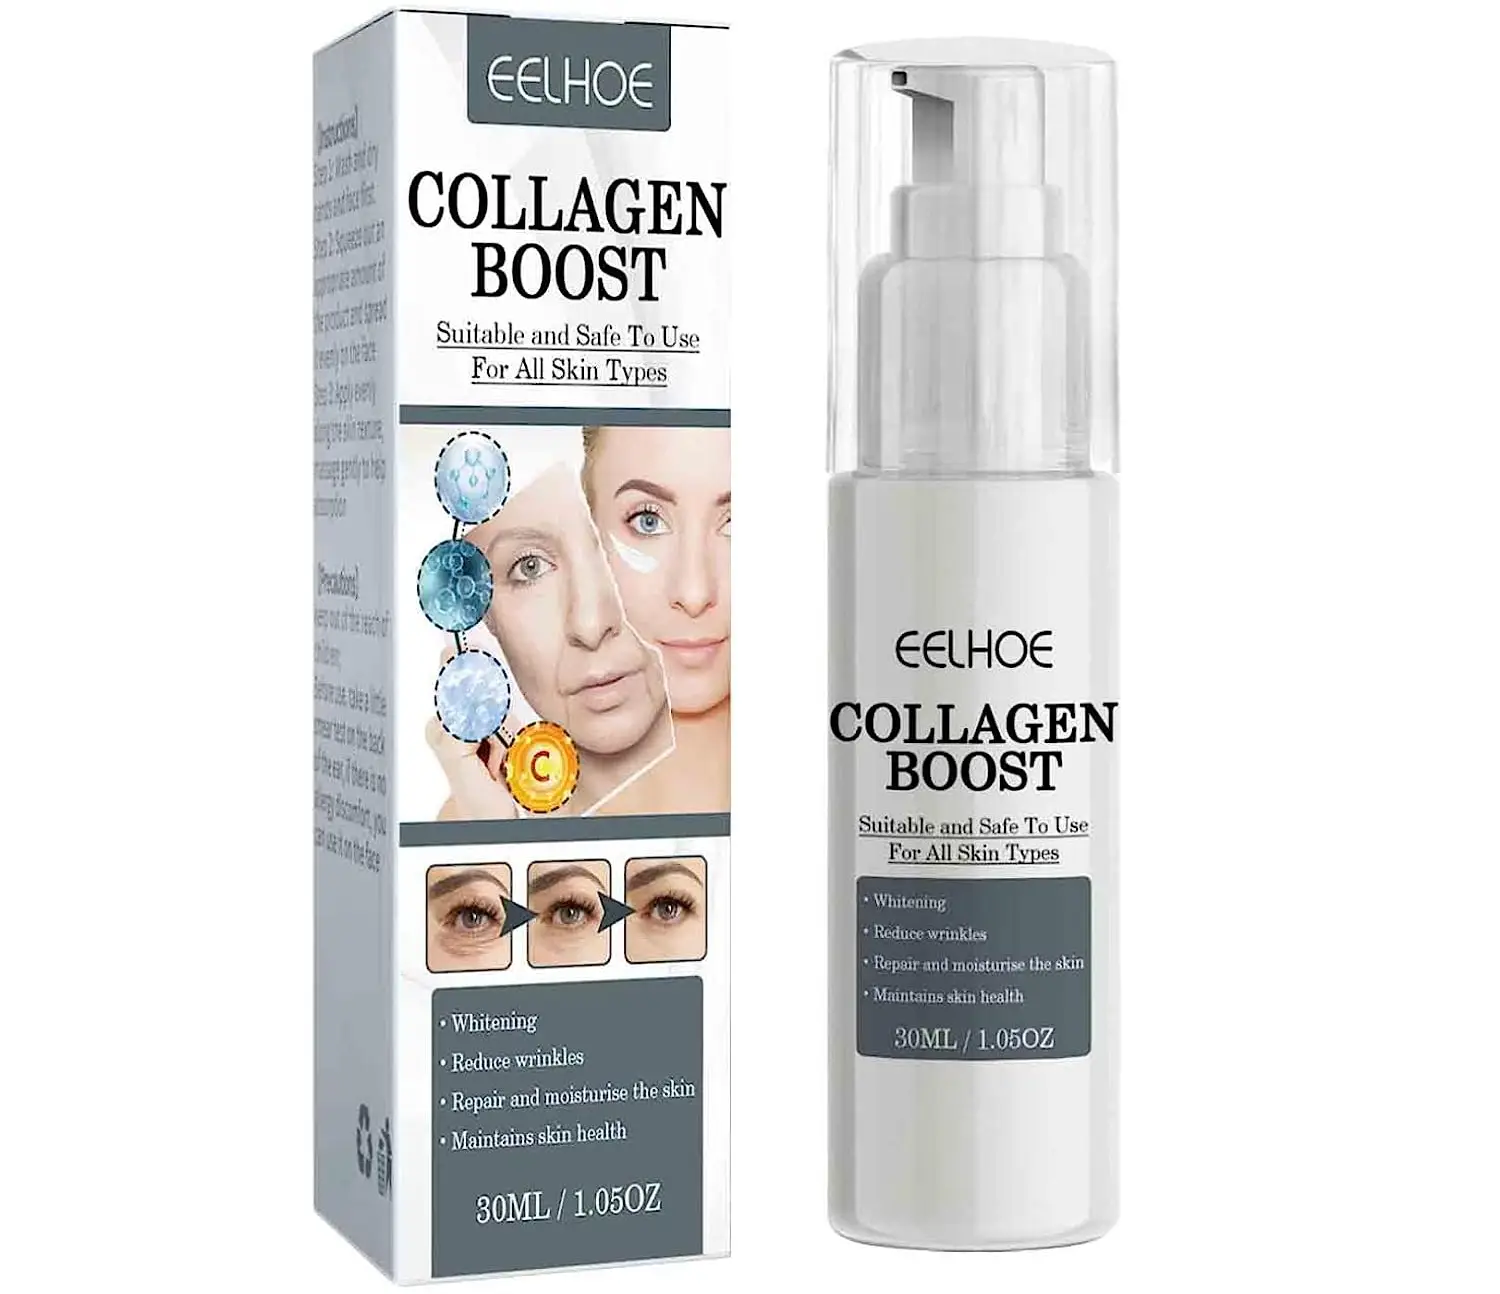 You are currently viewing Eelhoe Collagen Boost Reviews: Is It Legit or Scam?